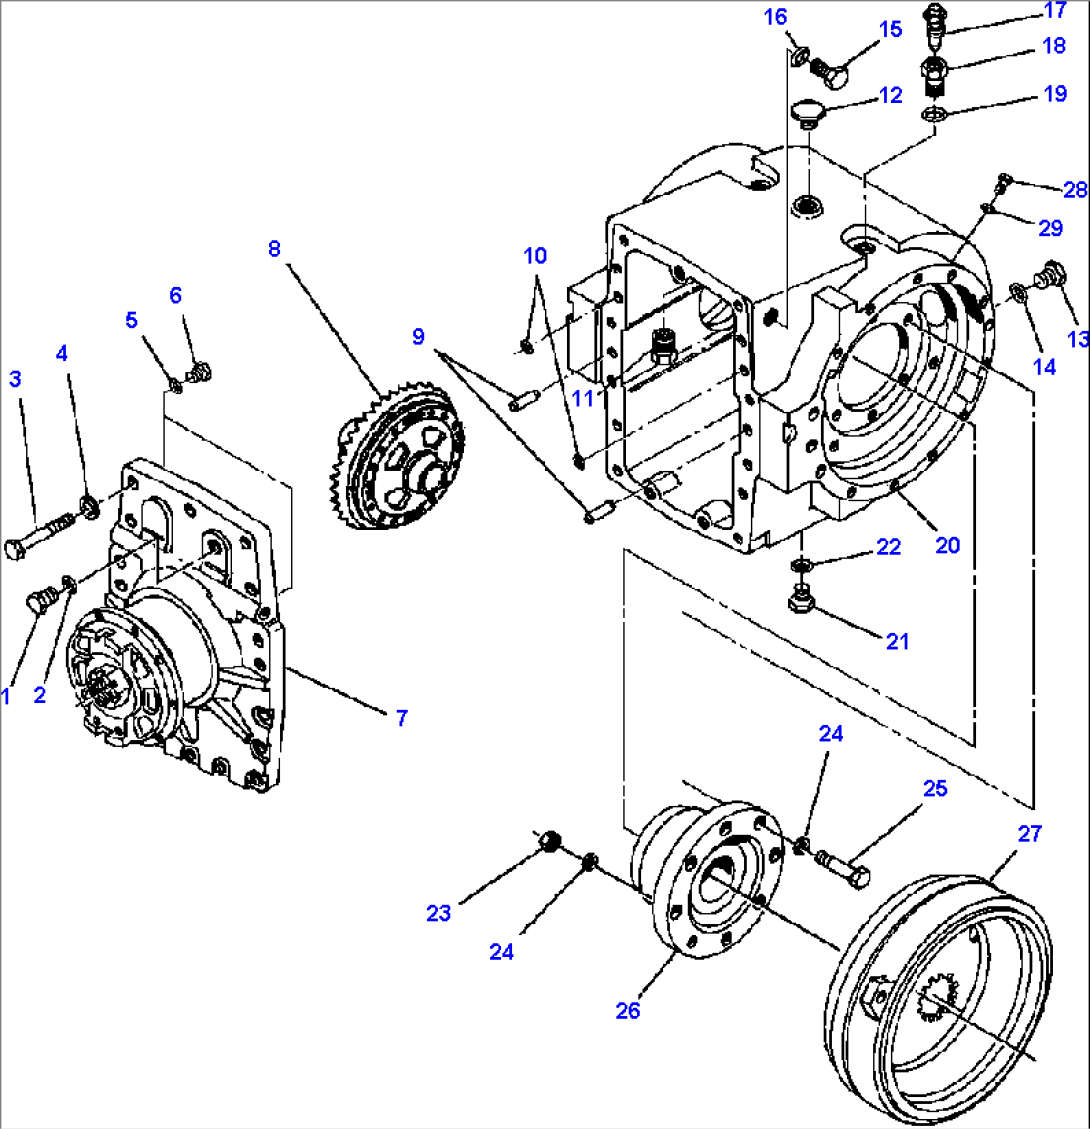 FIG. F5550-01A8 DIFFERENTIAL CASE ASSEMBLY - LOCK/UNLOCK